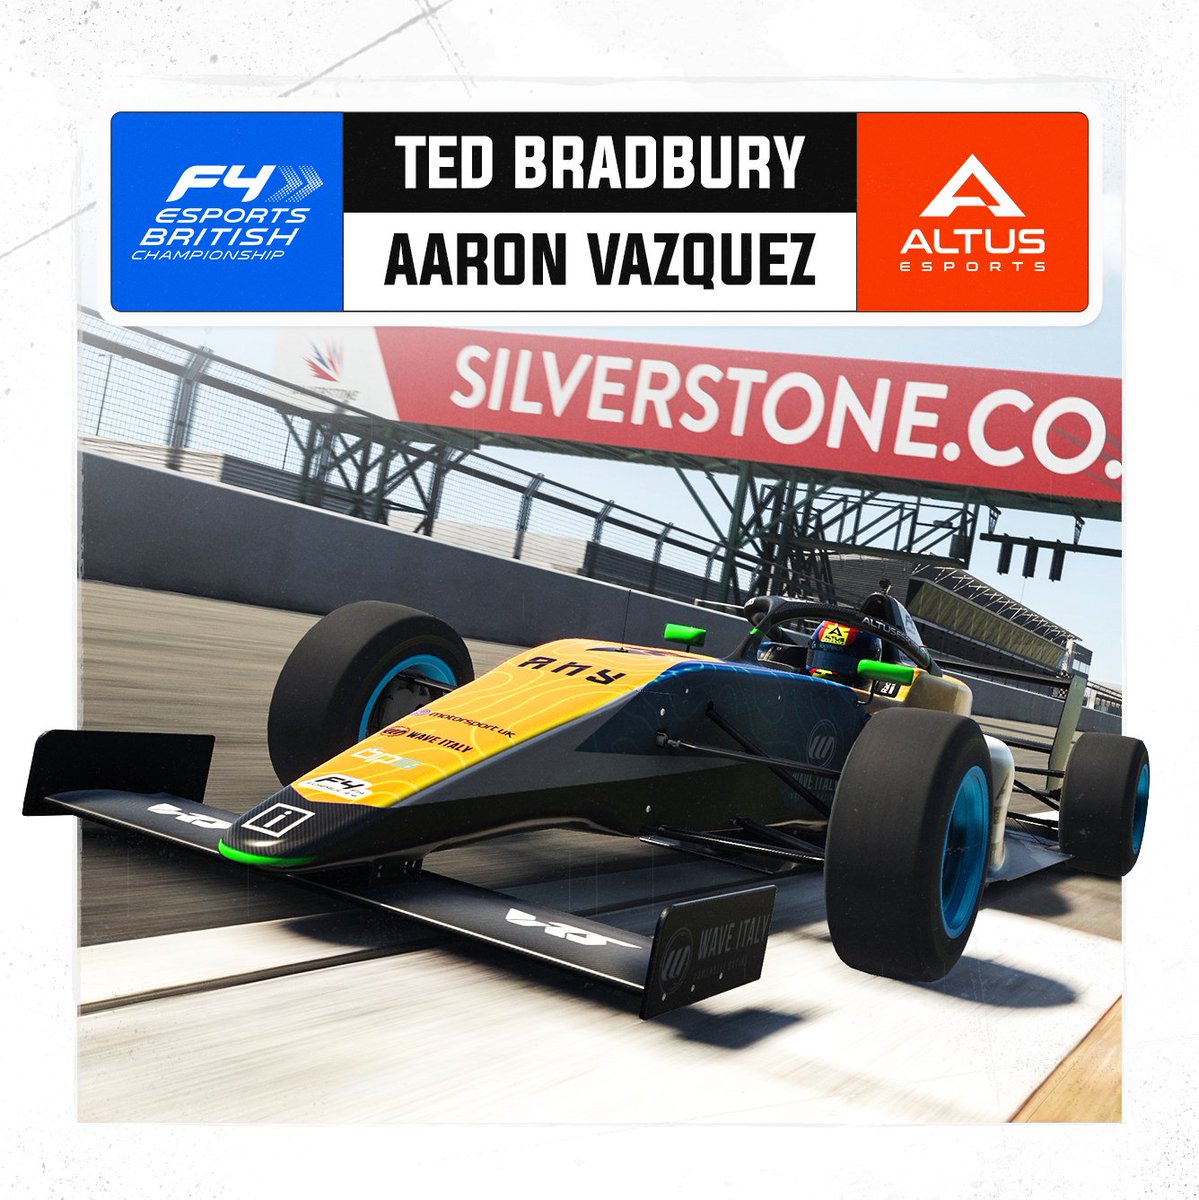 We're excited to announce our involvement in the @BritishF4 Esports Championship, run in conjunction with @MsptUK_Esports. Our Drivers include: 🇬🇧 #TedBradbury 🇪🇸 @AVL_44 Round 1 kicks off on September 27th! Let's go! #WeAreAltus @iRacing